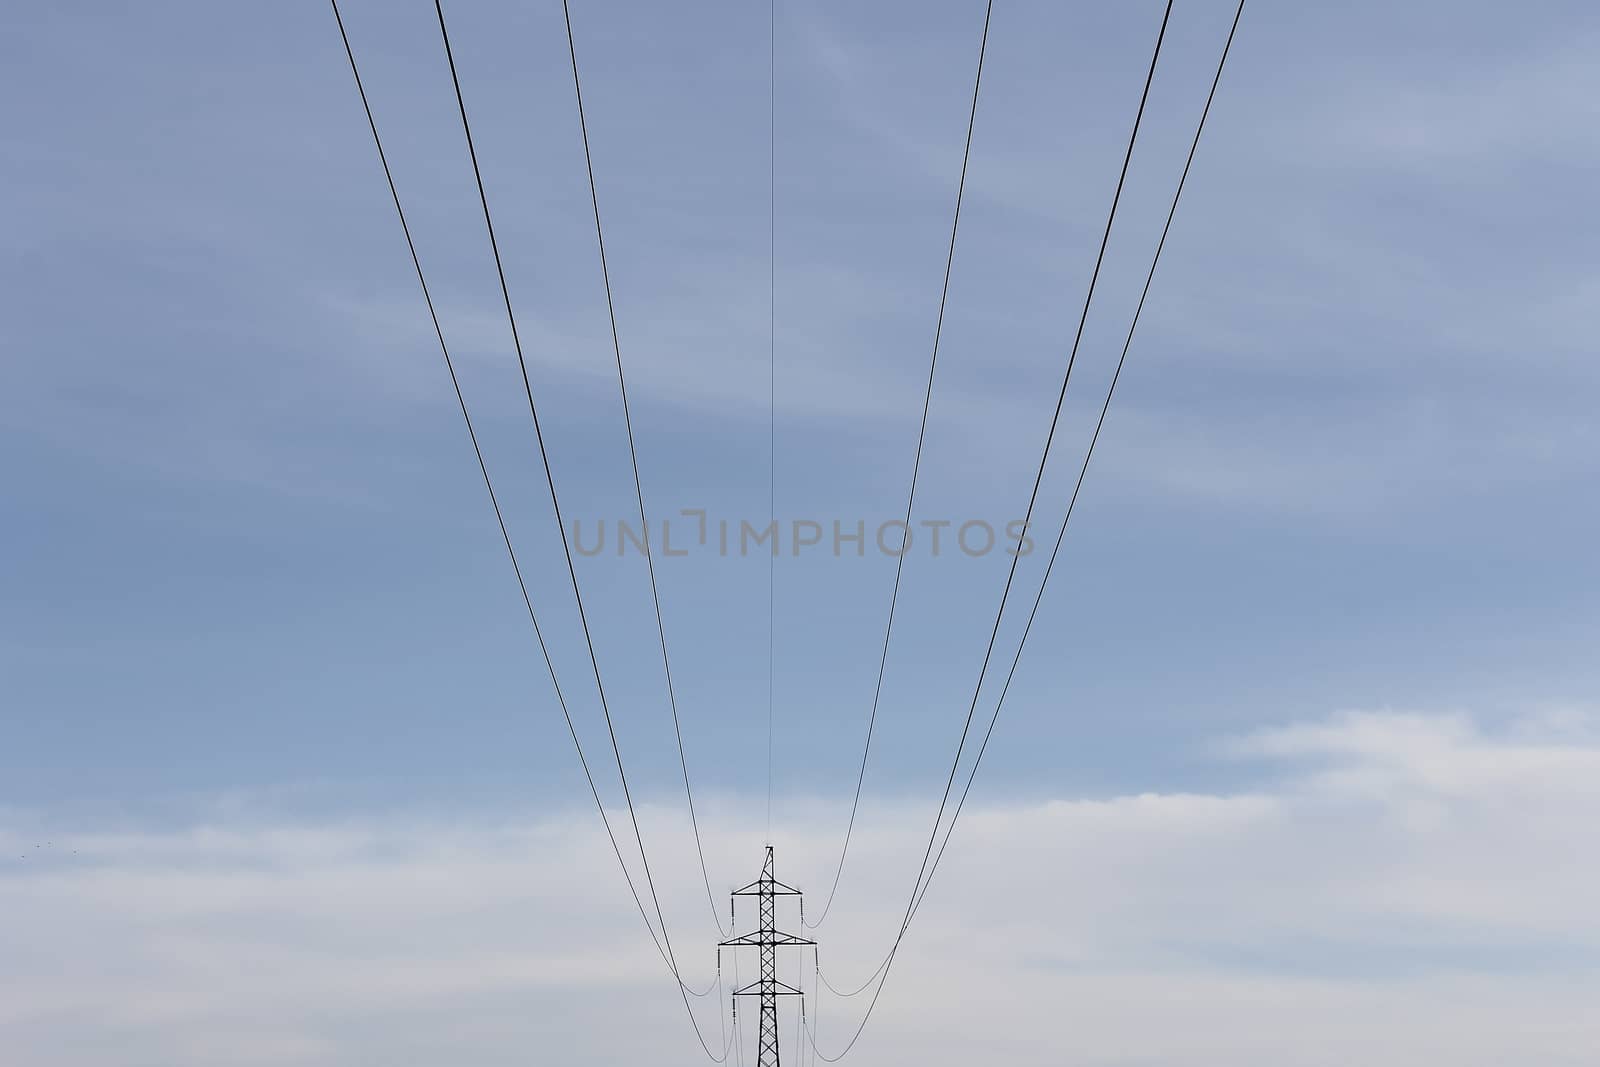 Transmission line electro wire by Ukid123